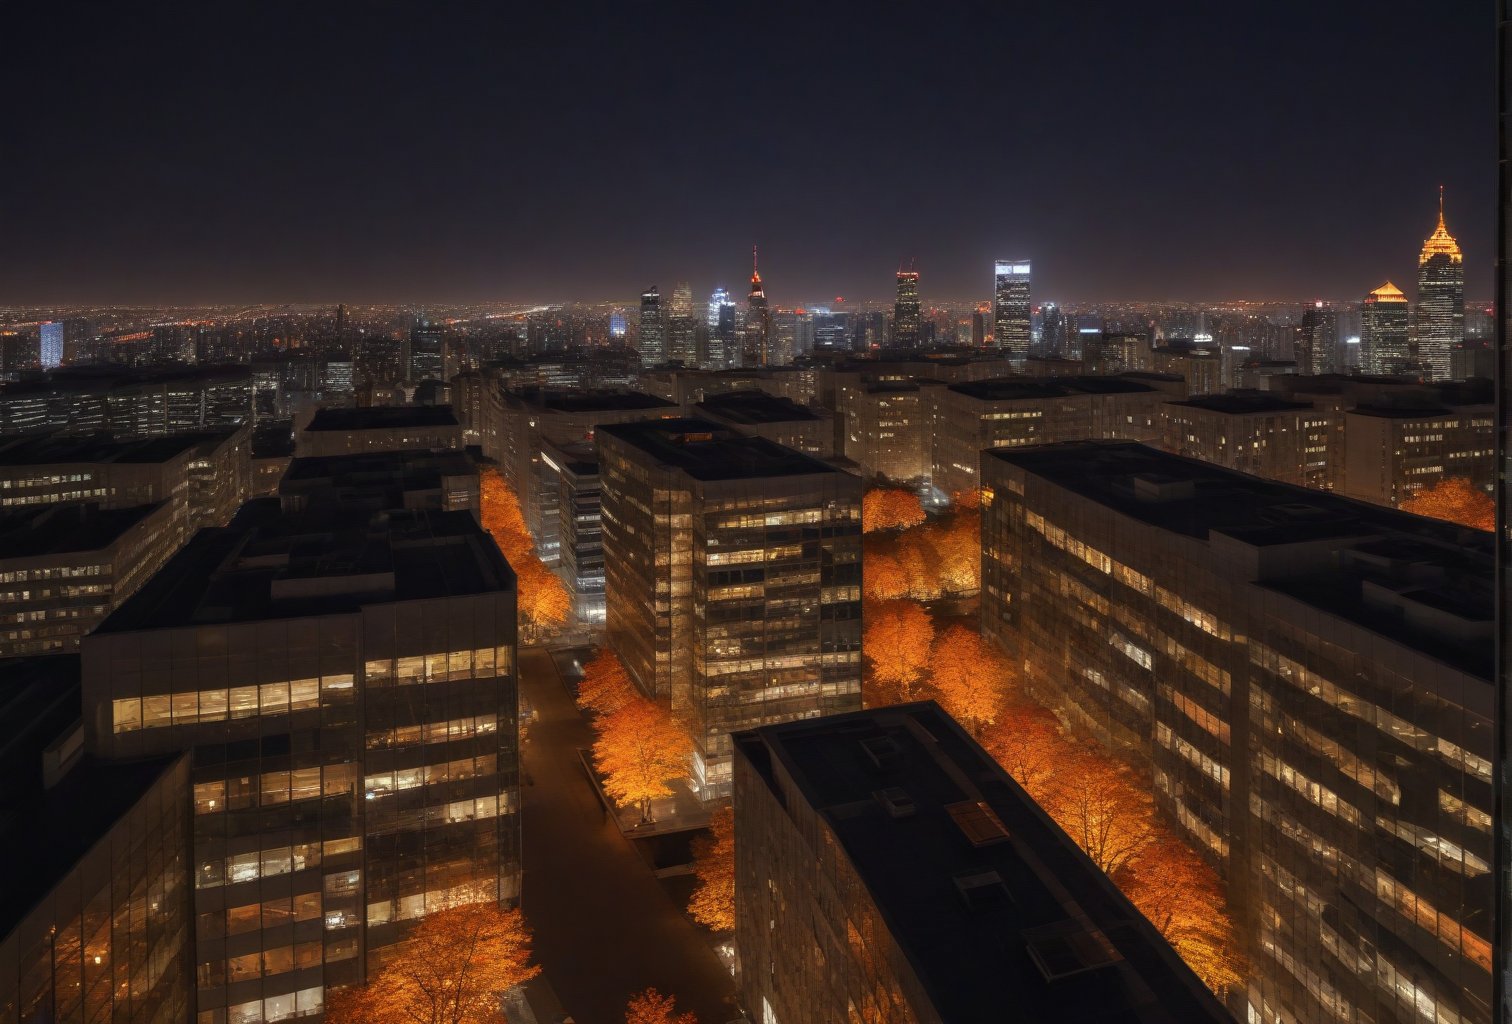 Night, autumn, view from the roof of a skyscraper, skyscrapers with orange windows, lanterns highlight the golden foliage of the trees and are reflected in the glass of the skyscrapers